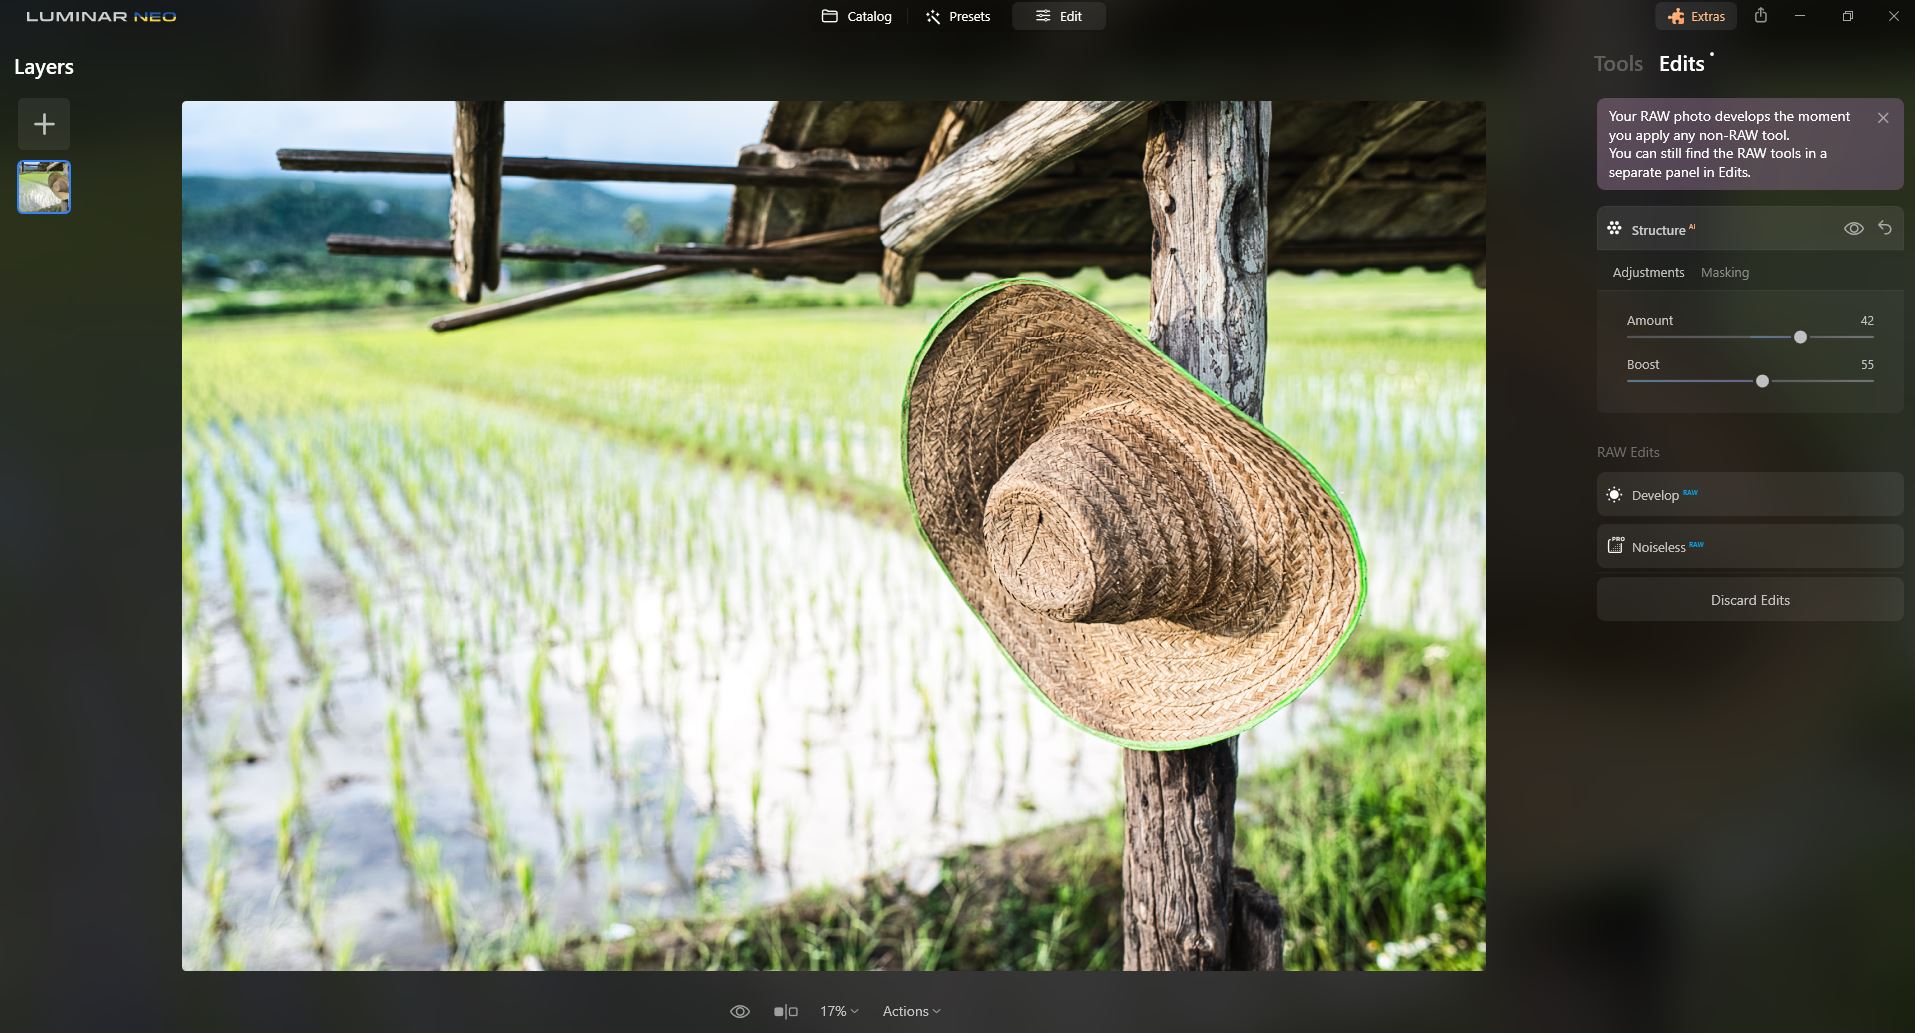 Straw hat in a rice field shack illustrating the use of Luminar Neo Structure tools